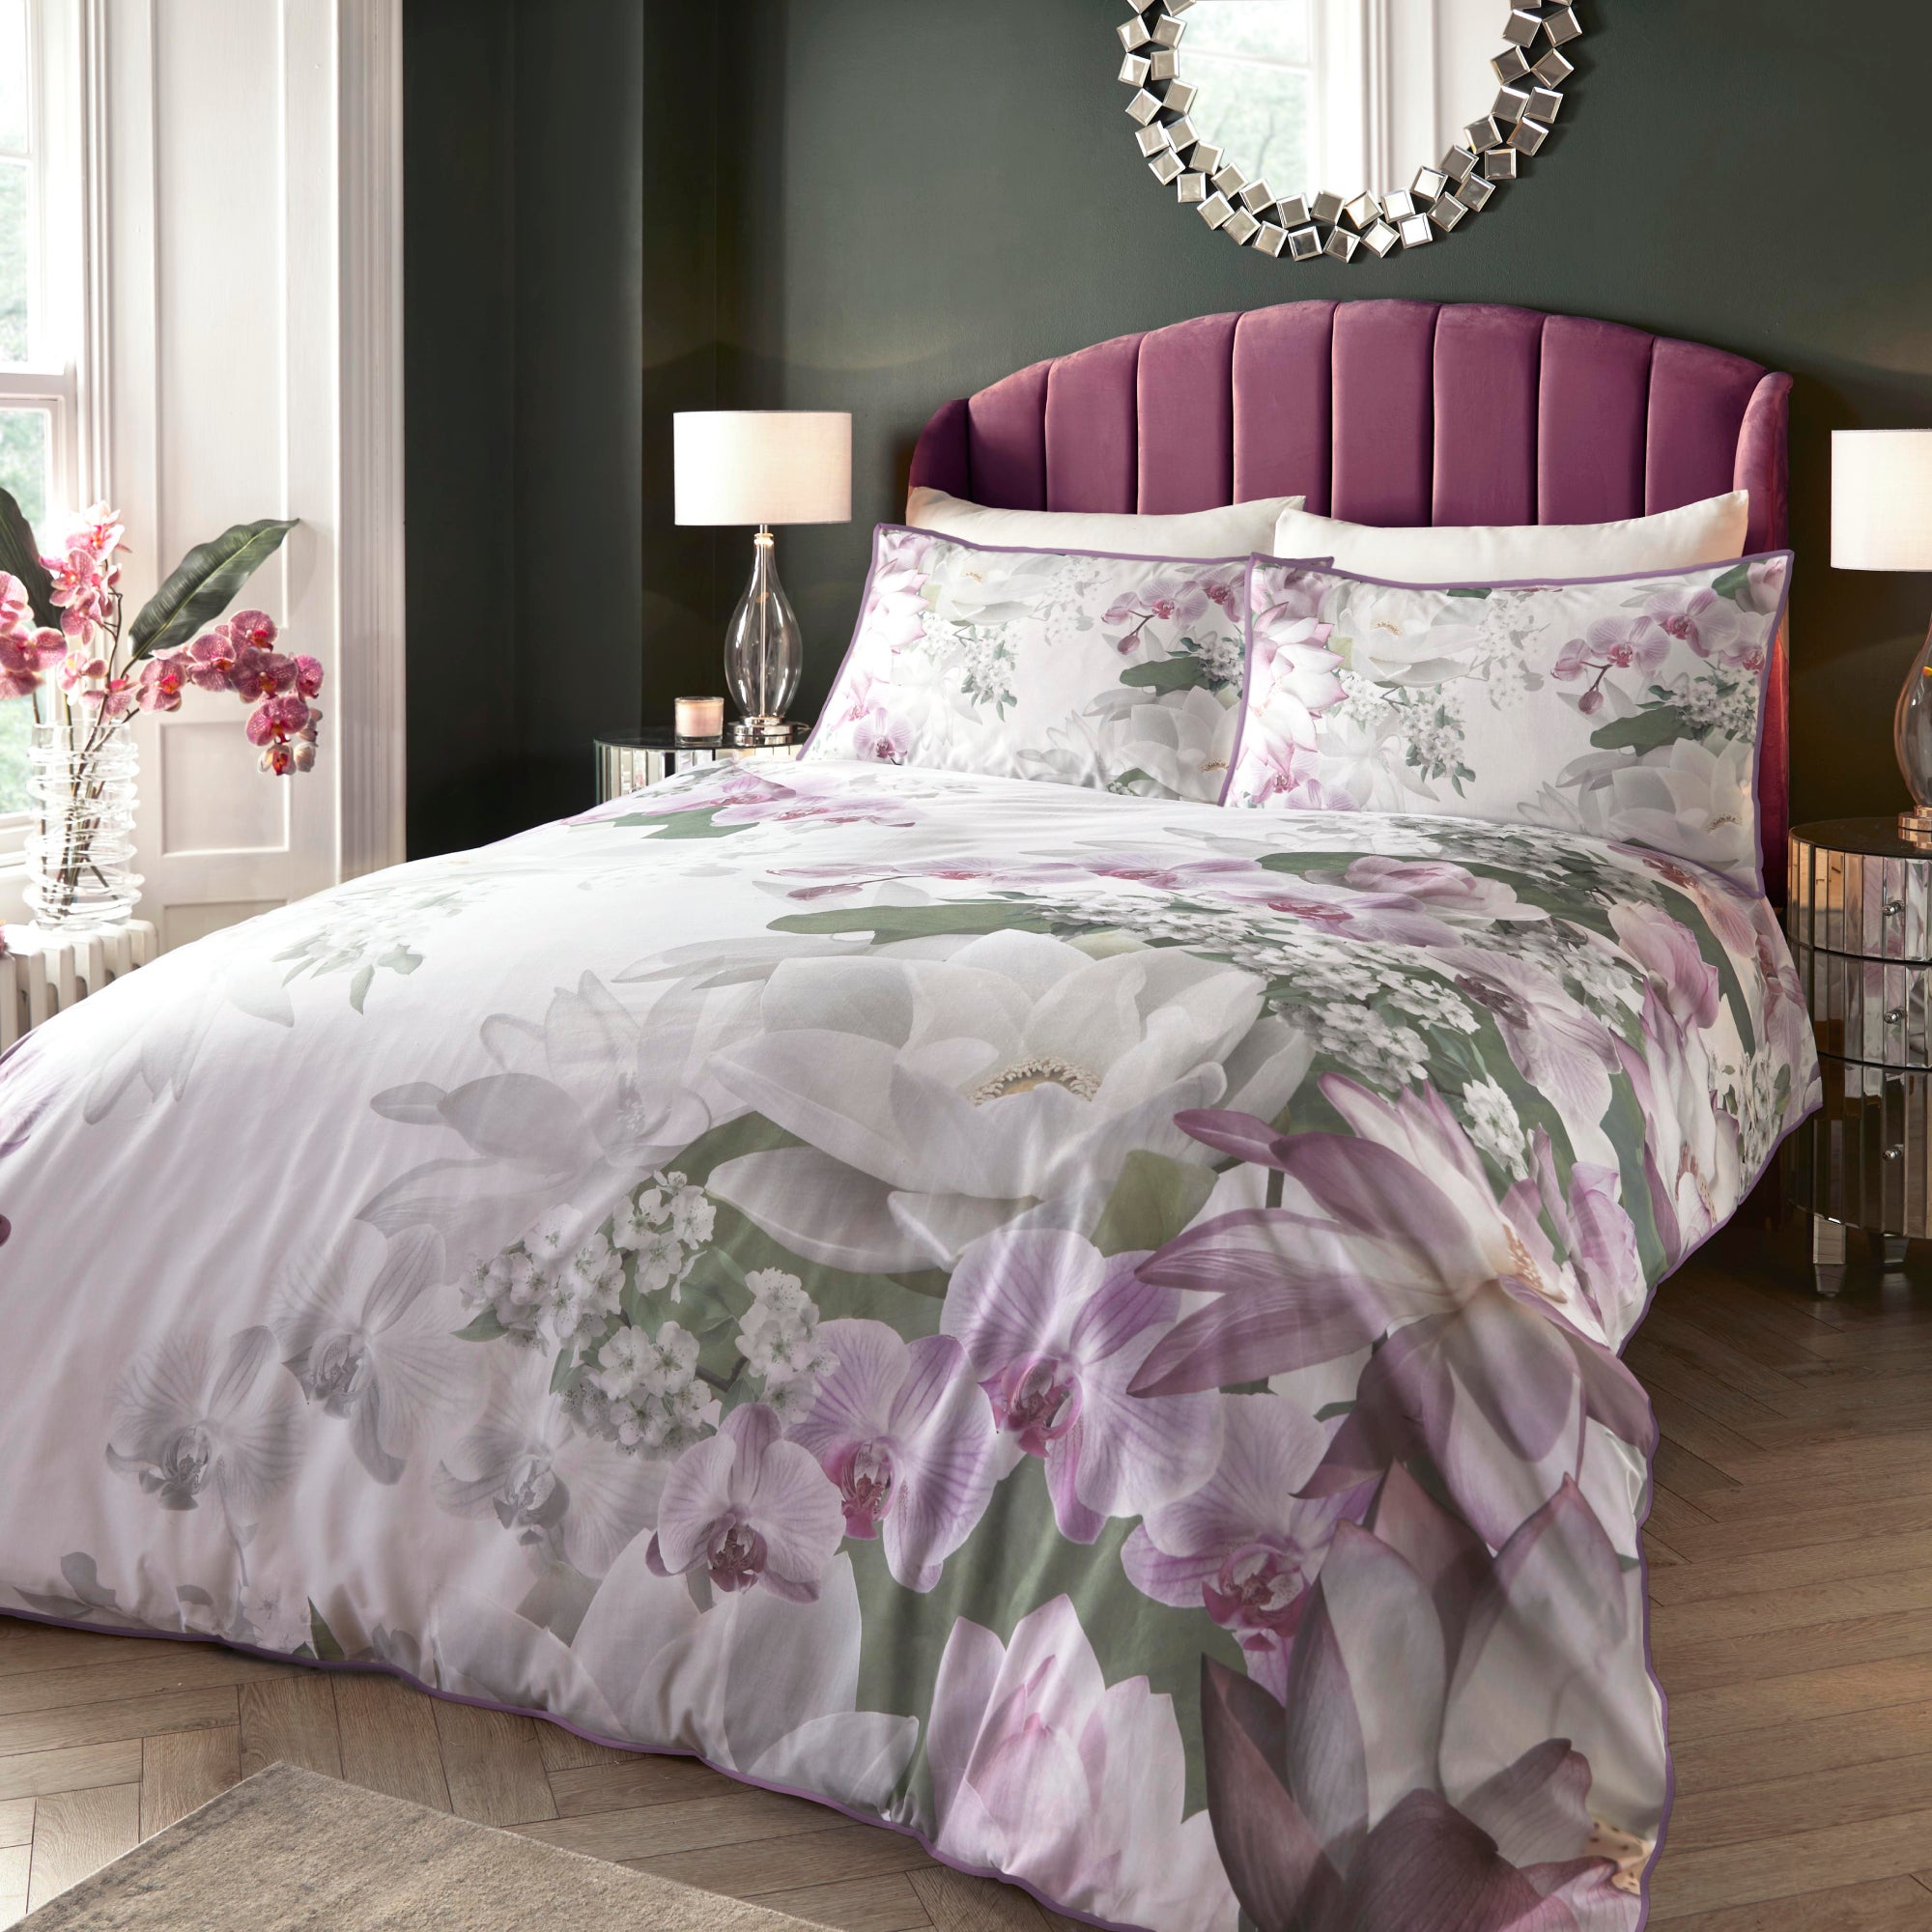 Lotus Floral Cotton Duvet Cover and Pillowcase Set Pink/Green